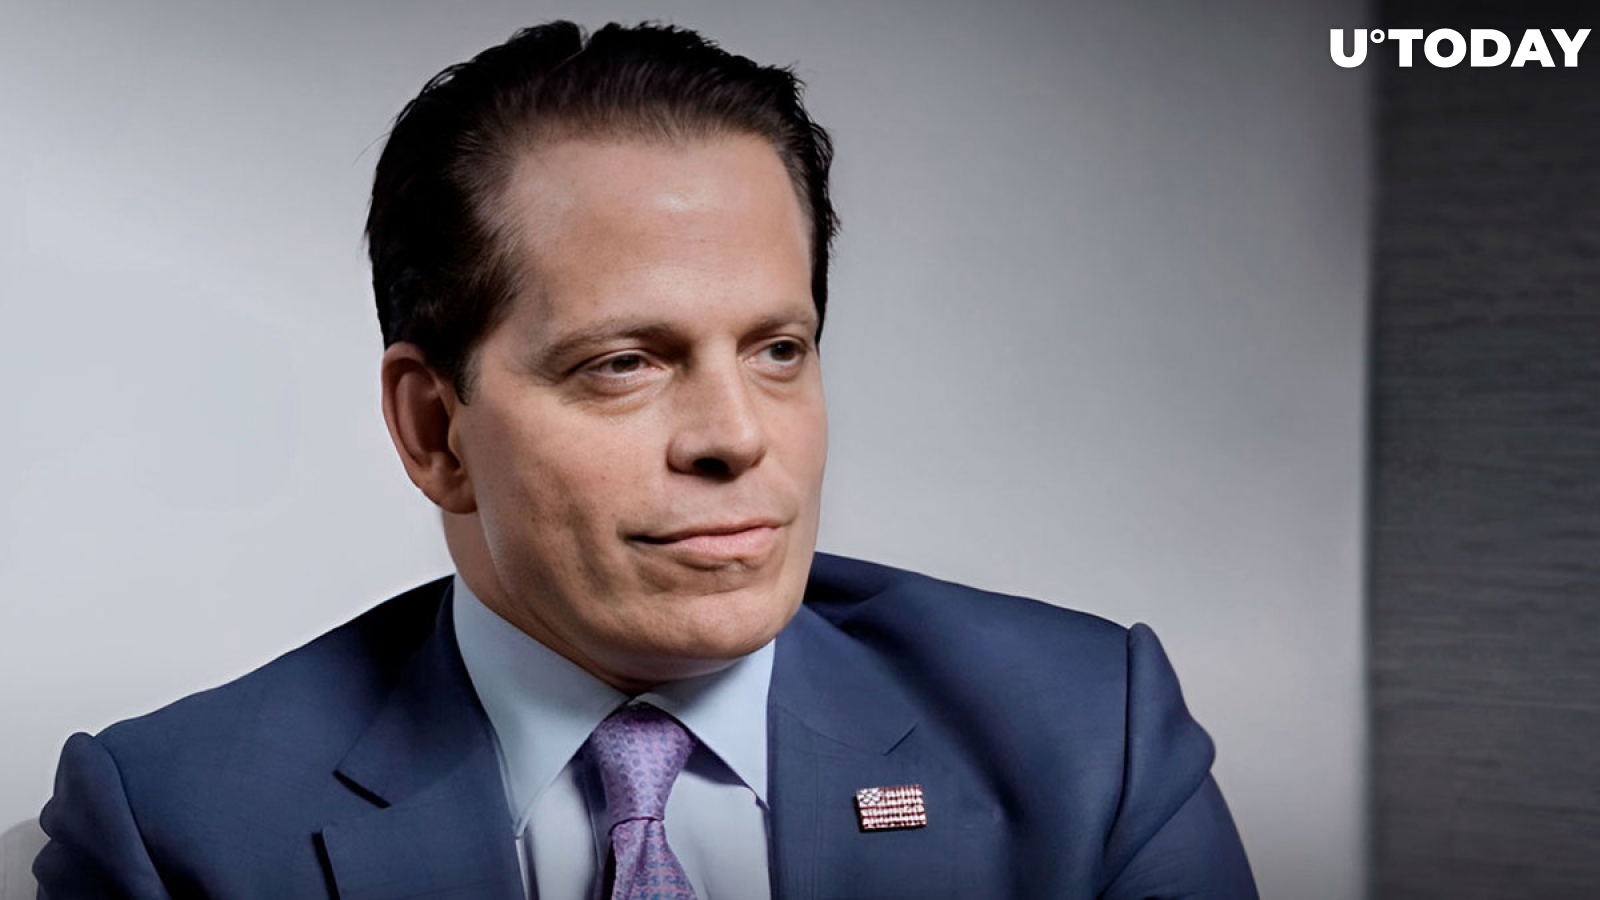 Here’s What Big ‘Crypto Goal’ Anthony Scaramucci Chases This Year